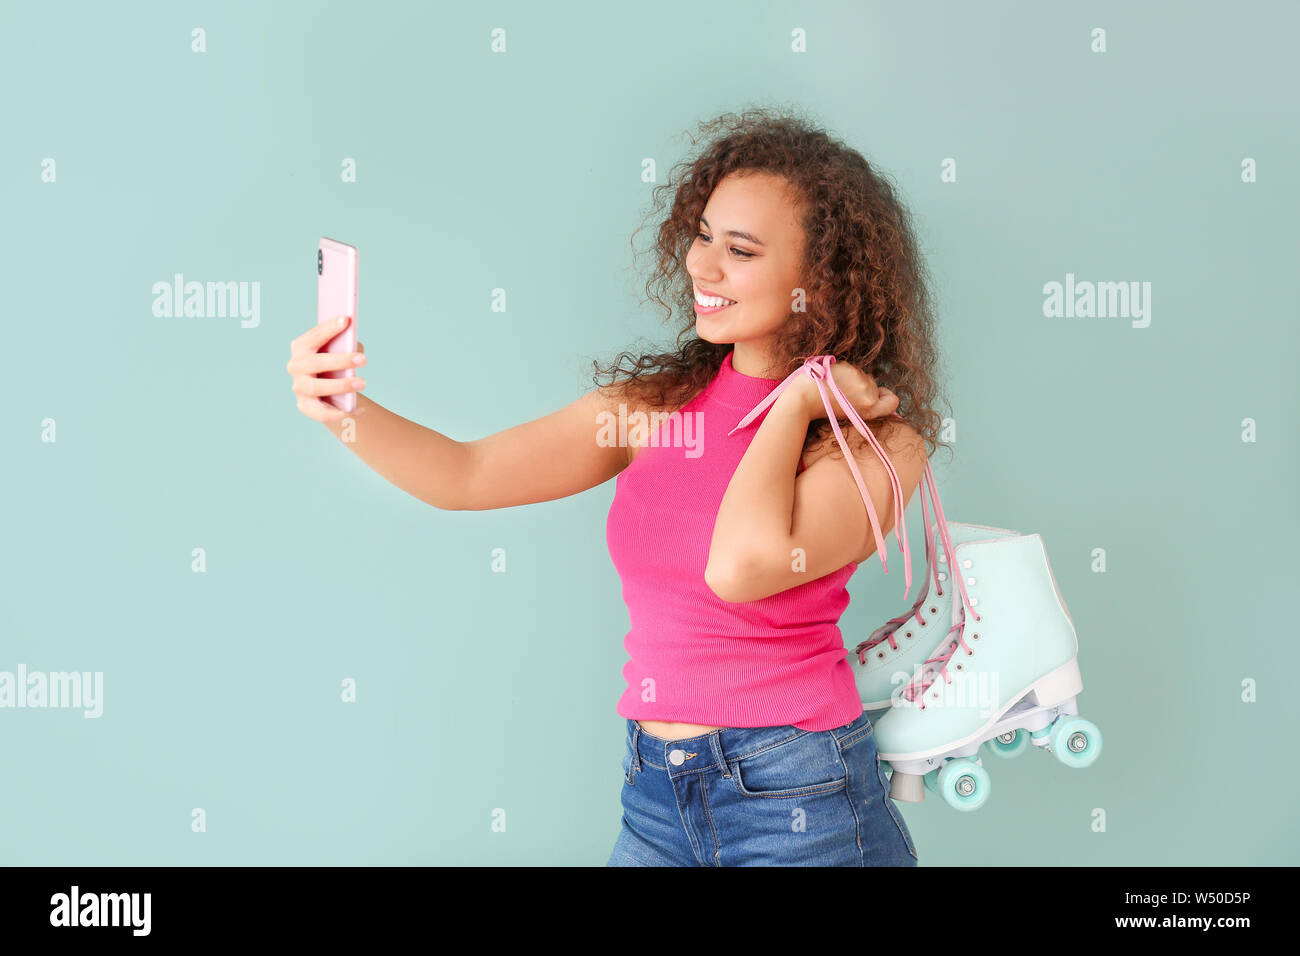 Beautiful young woman with roller skates taking selfie on color background Stock Photo